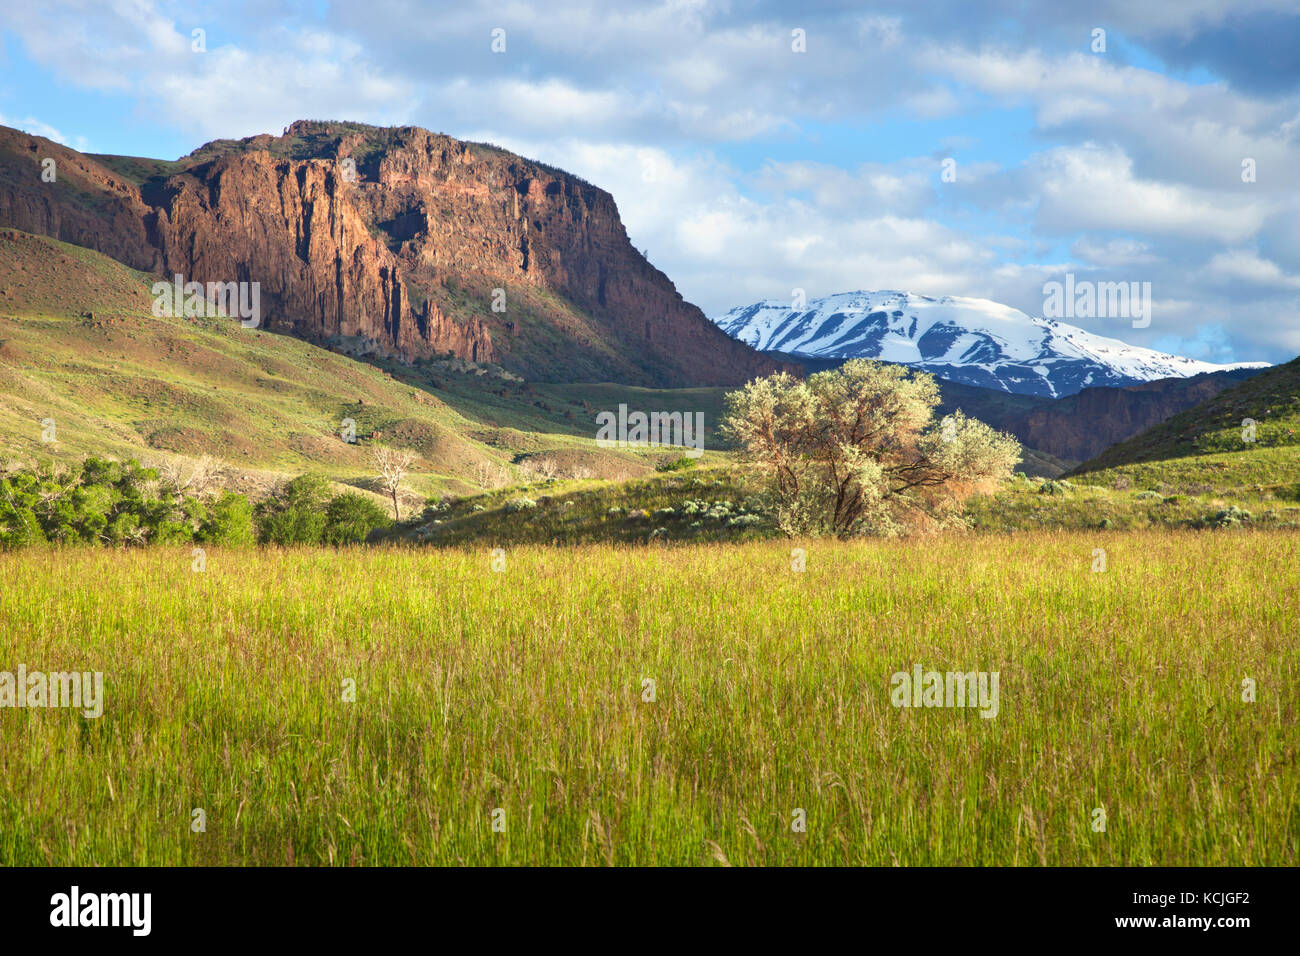 A field and trees below a rugged cliff and snow-capped mountains in western Wyoming Stock Photo